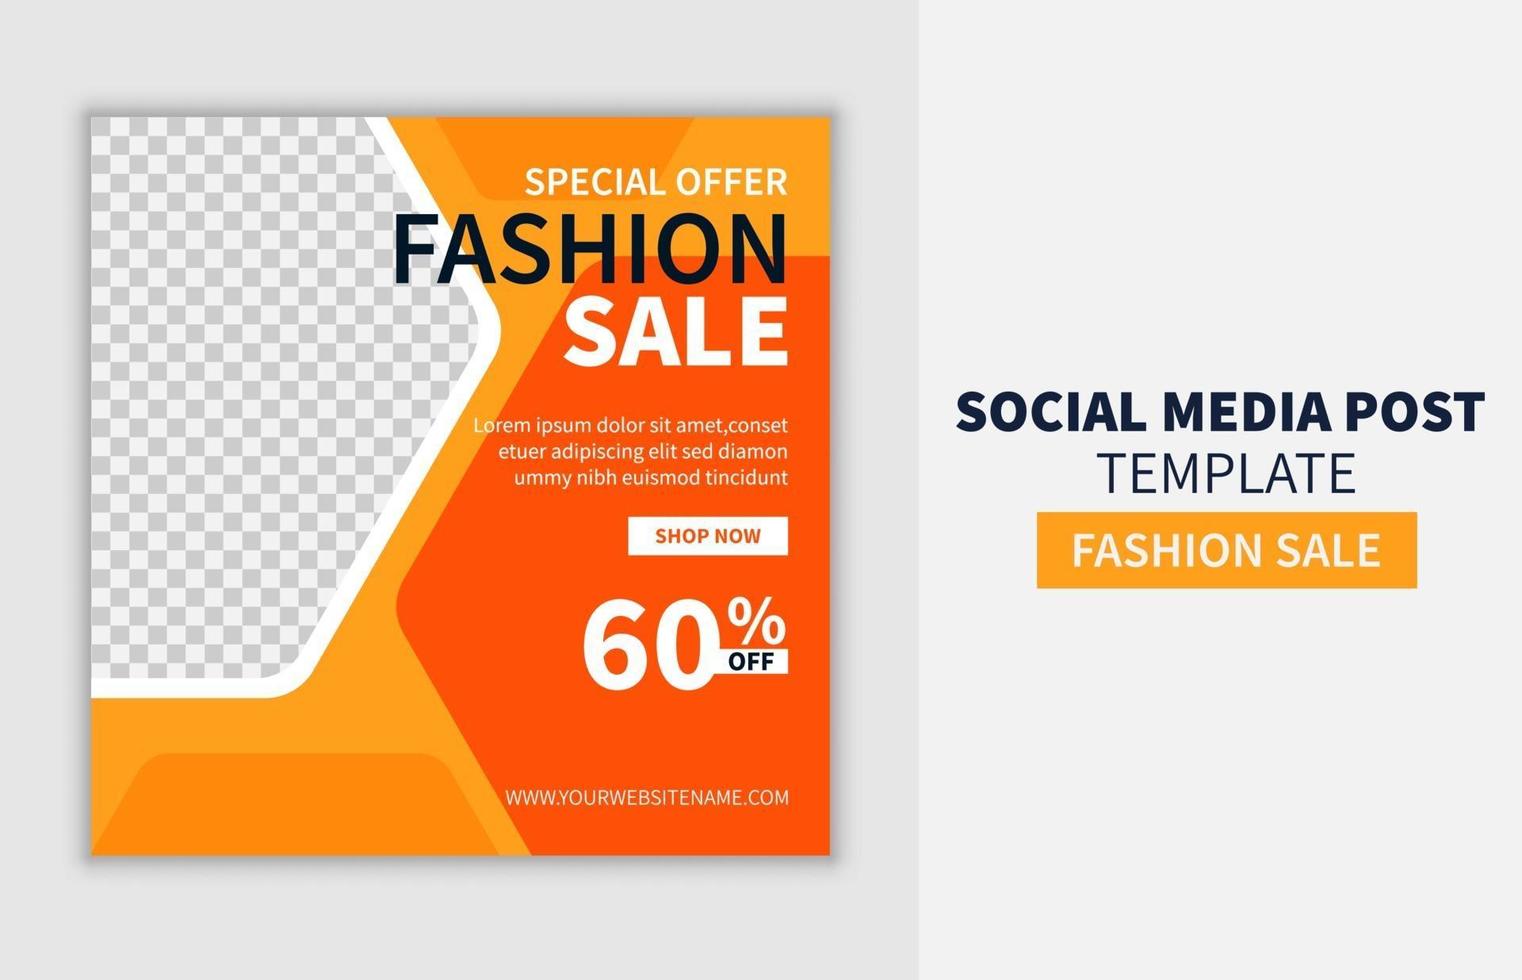 Creative Fashion sale promo social media post template design banner with yellow color style. good for online business promotion vector